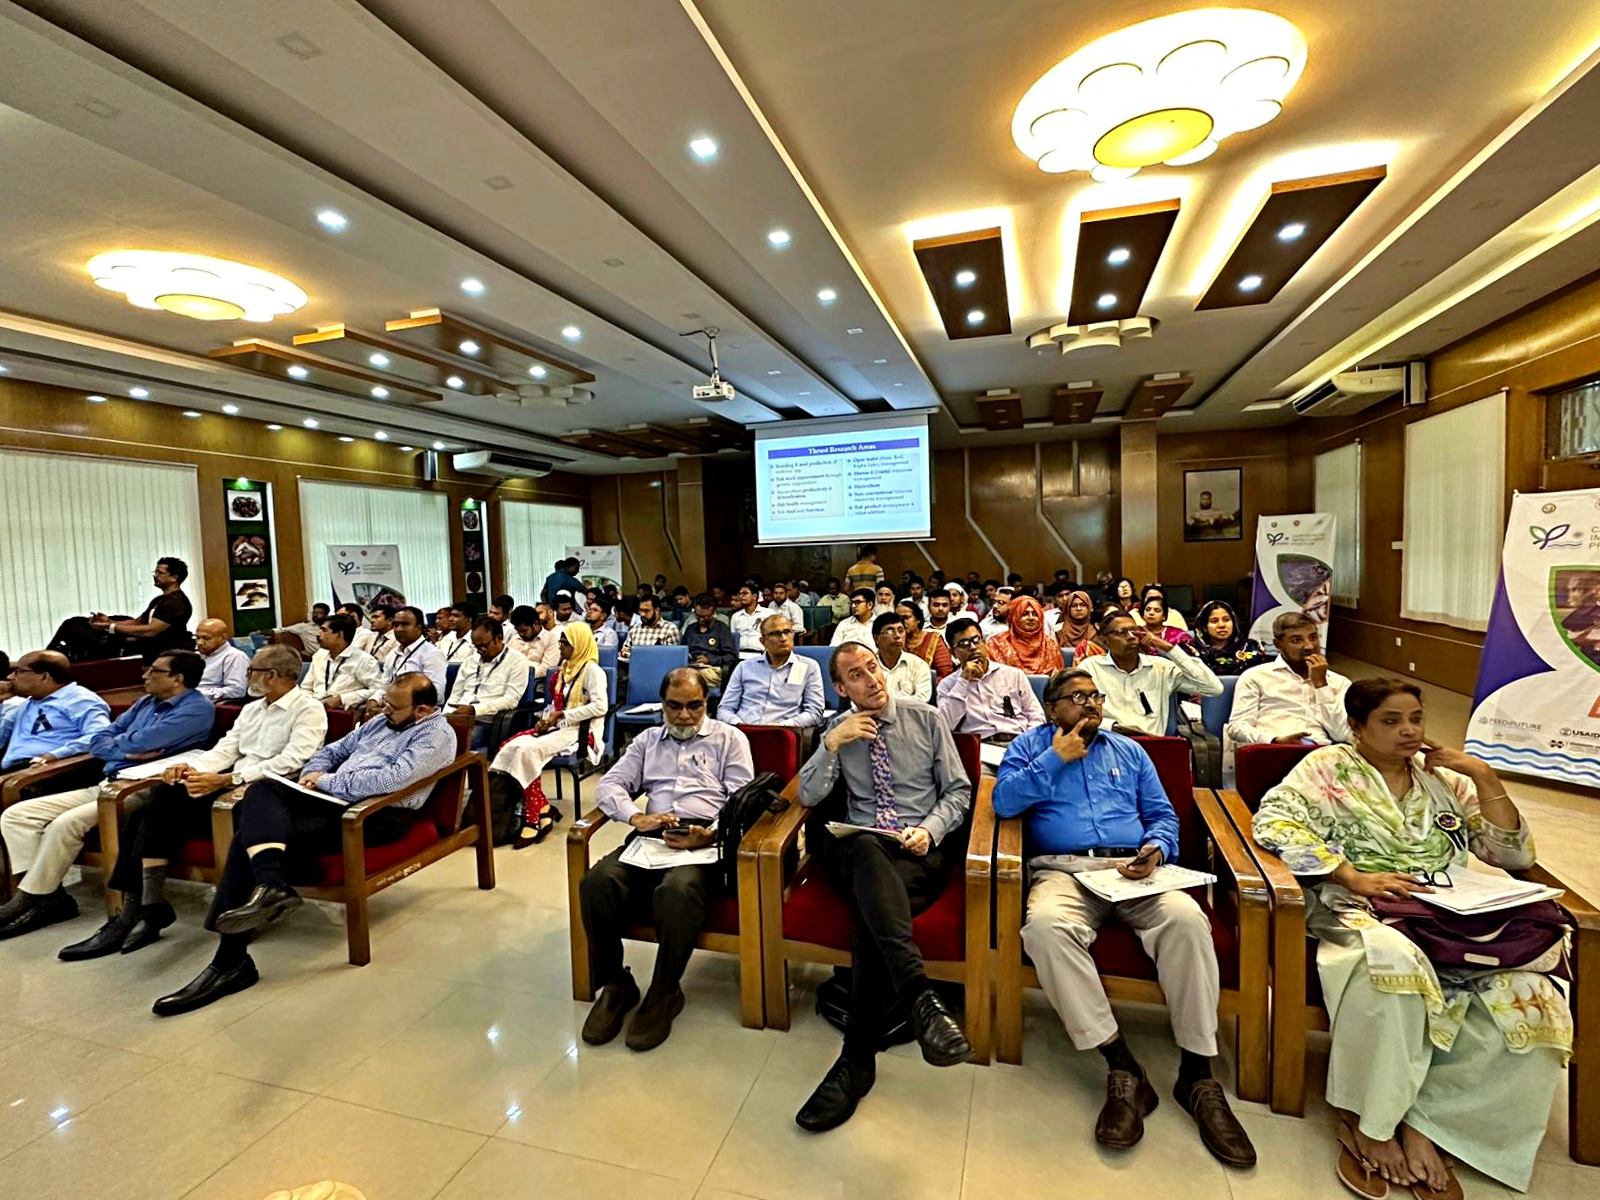 The audience of the Carp Genetic Improvement Program workshop at BFRI auditorium, Mymensingh, included over 140 participants.